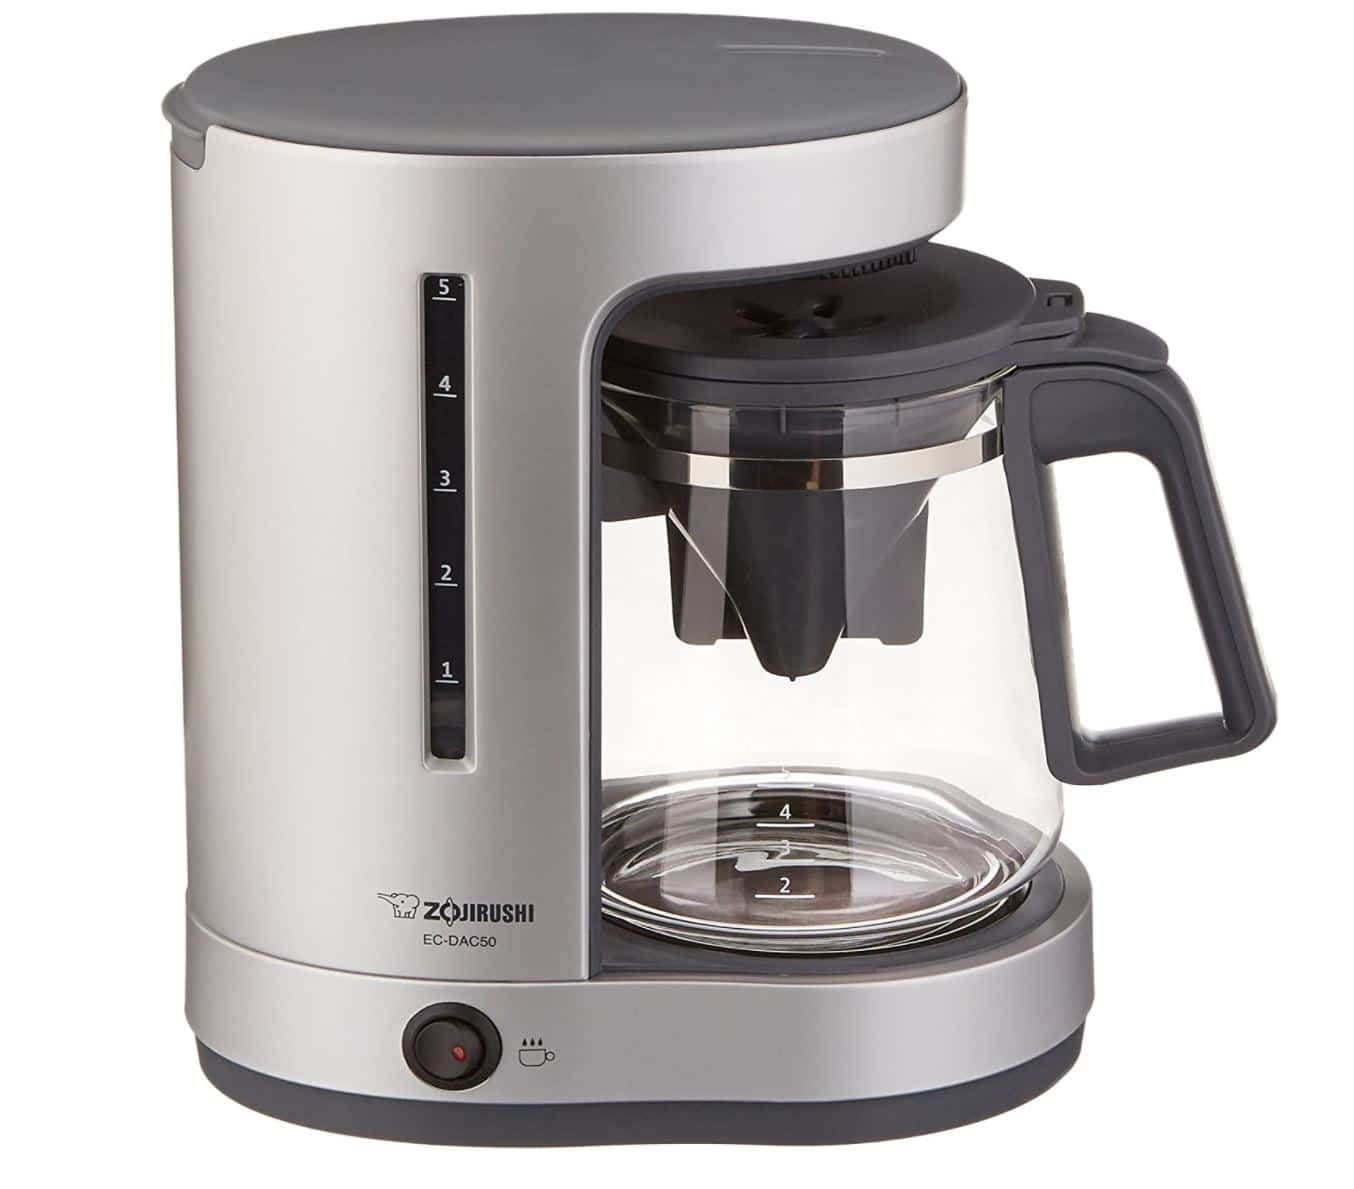 7 of the Best 4 Cup Coffee Maker Reviews 2021 Your Coffee and Tea